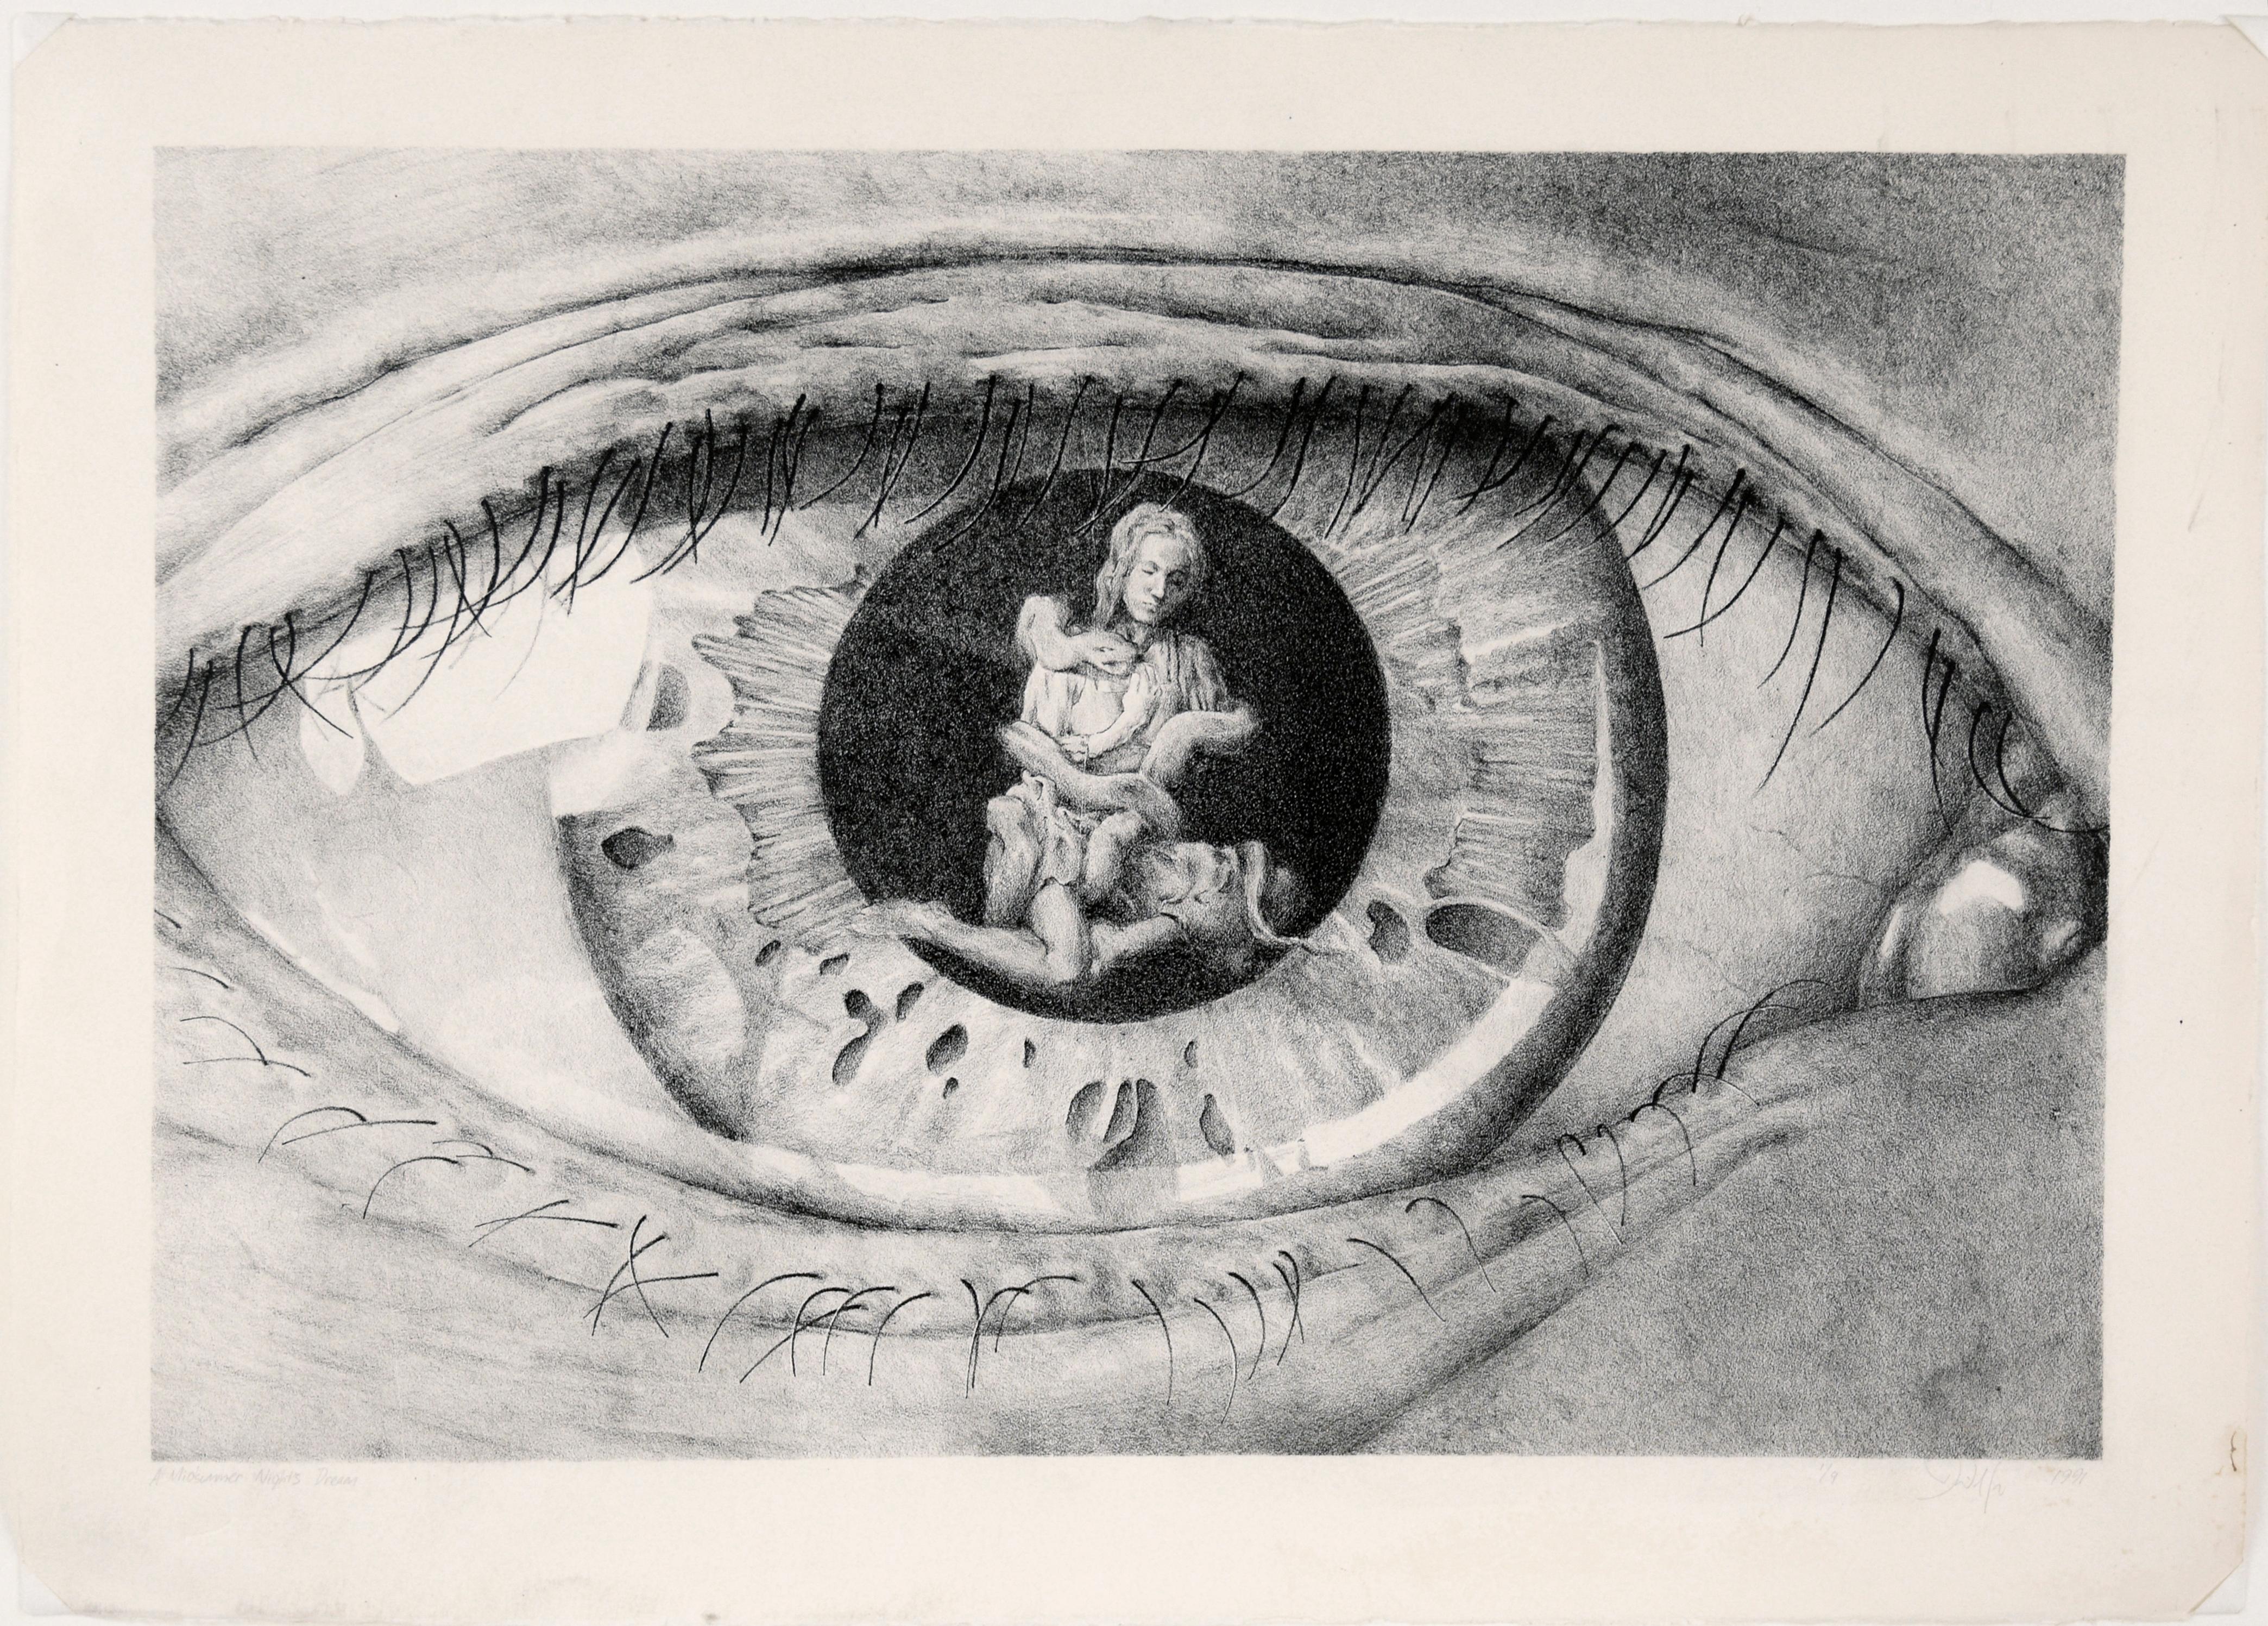 Detailed and vivid close-up of an eye with a reflection by an unknown artist (American, 20th Century). In the reflection of the eye, there is a person seated on the ground with a large snake coiled around their body. After a similar drawing by M.C.